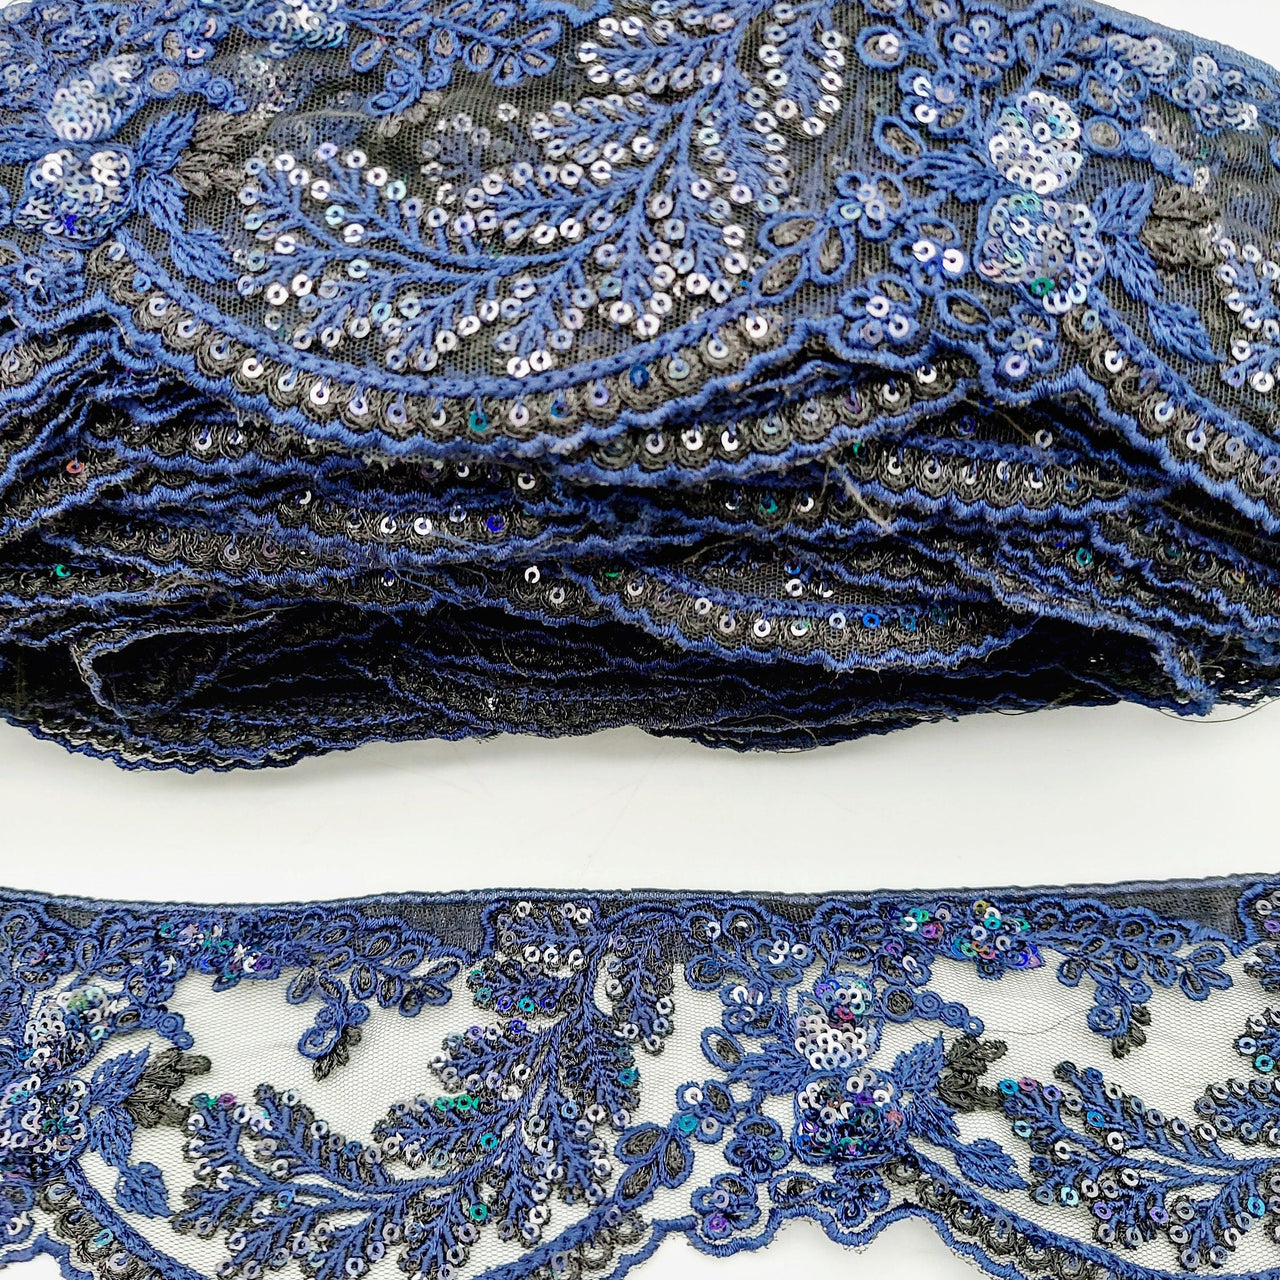 Black Net Scallop Lace Trim with Navy Blue Floral Embroidery With Sequins, Sari Border, Embroidered Trim